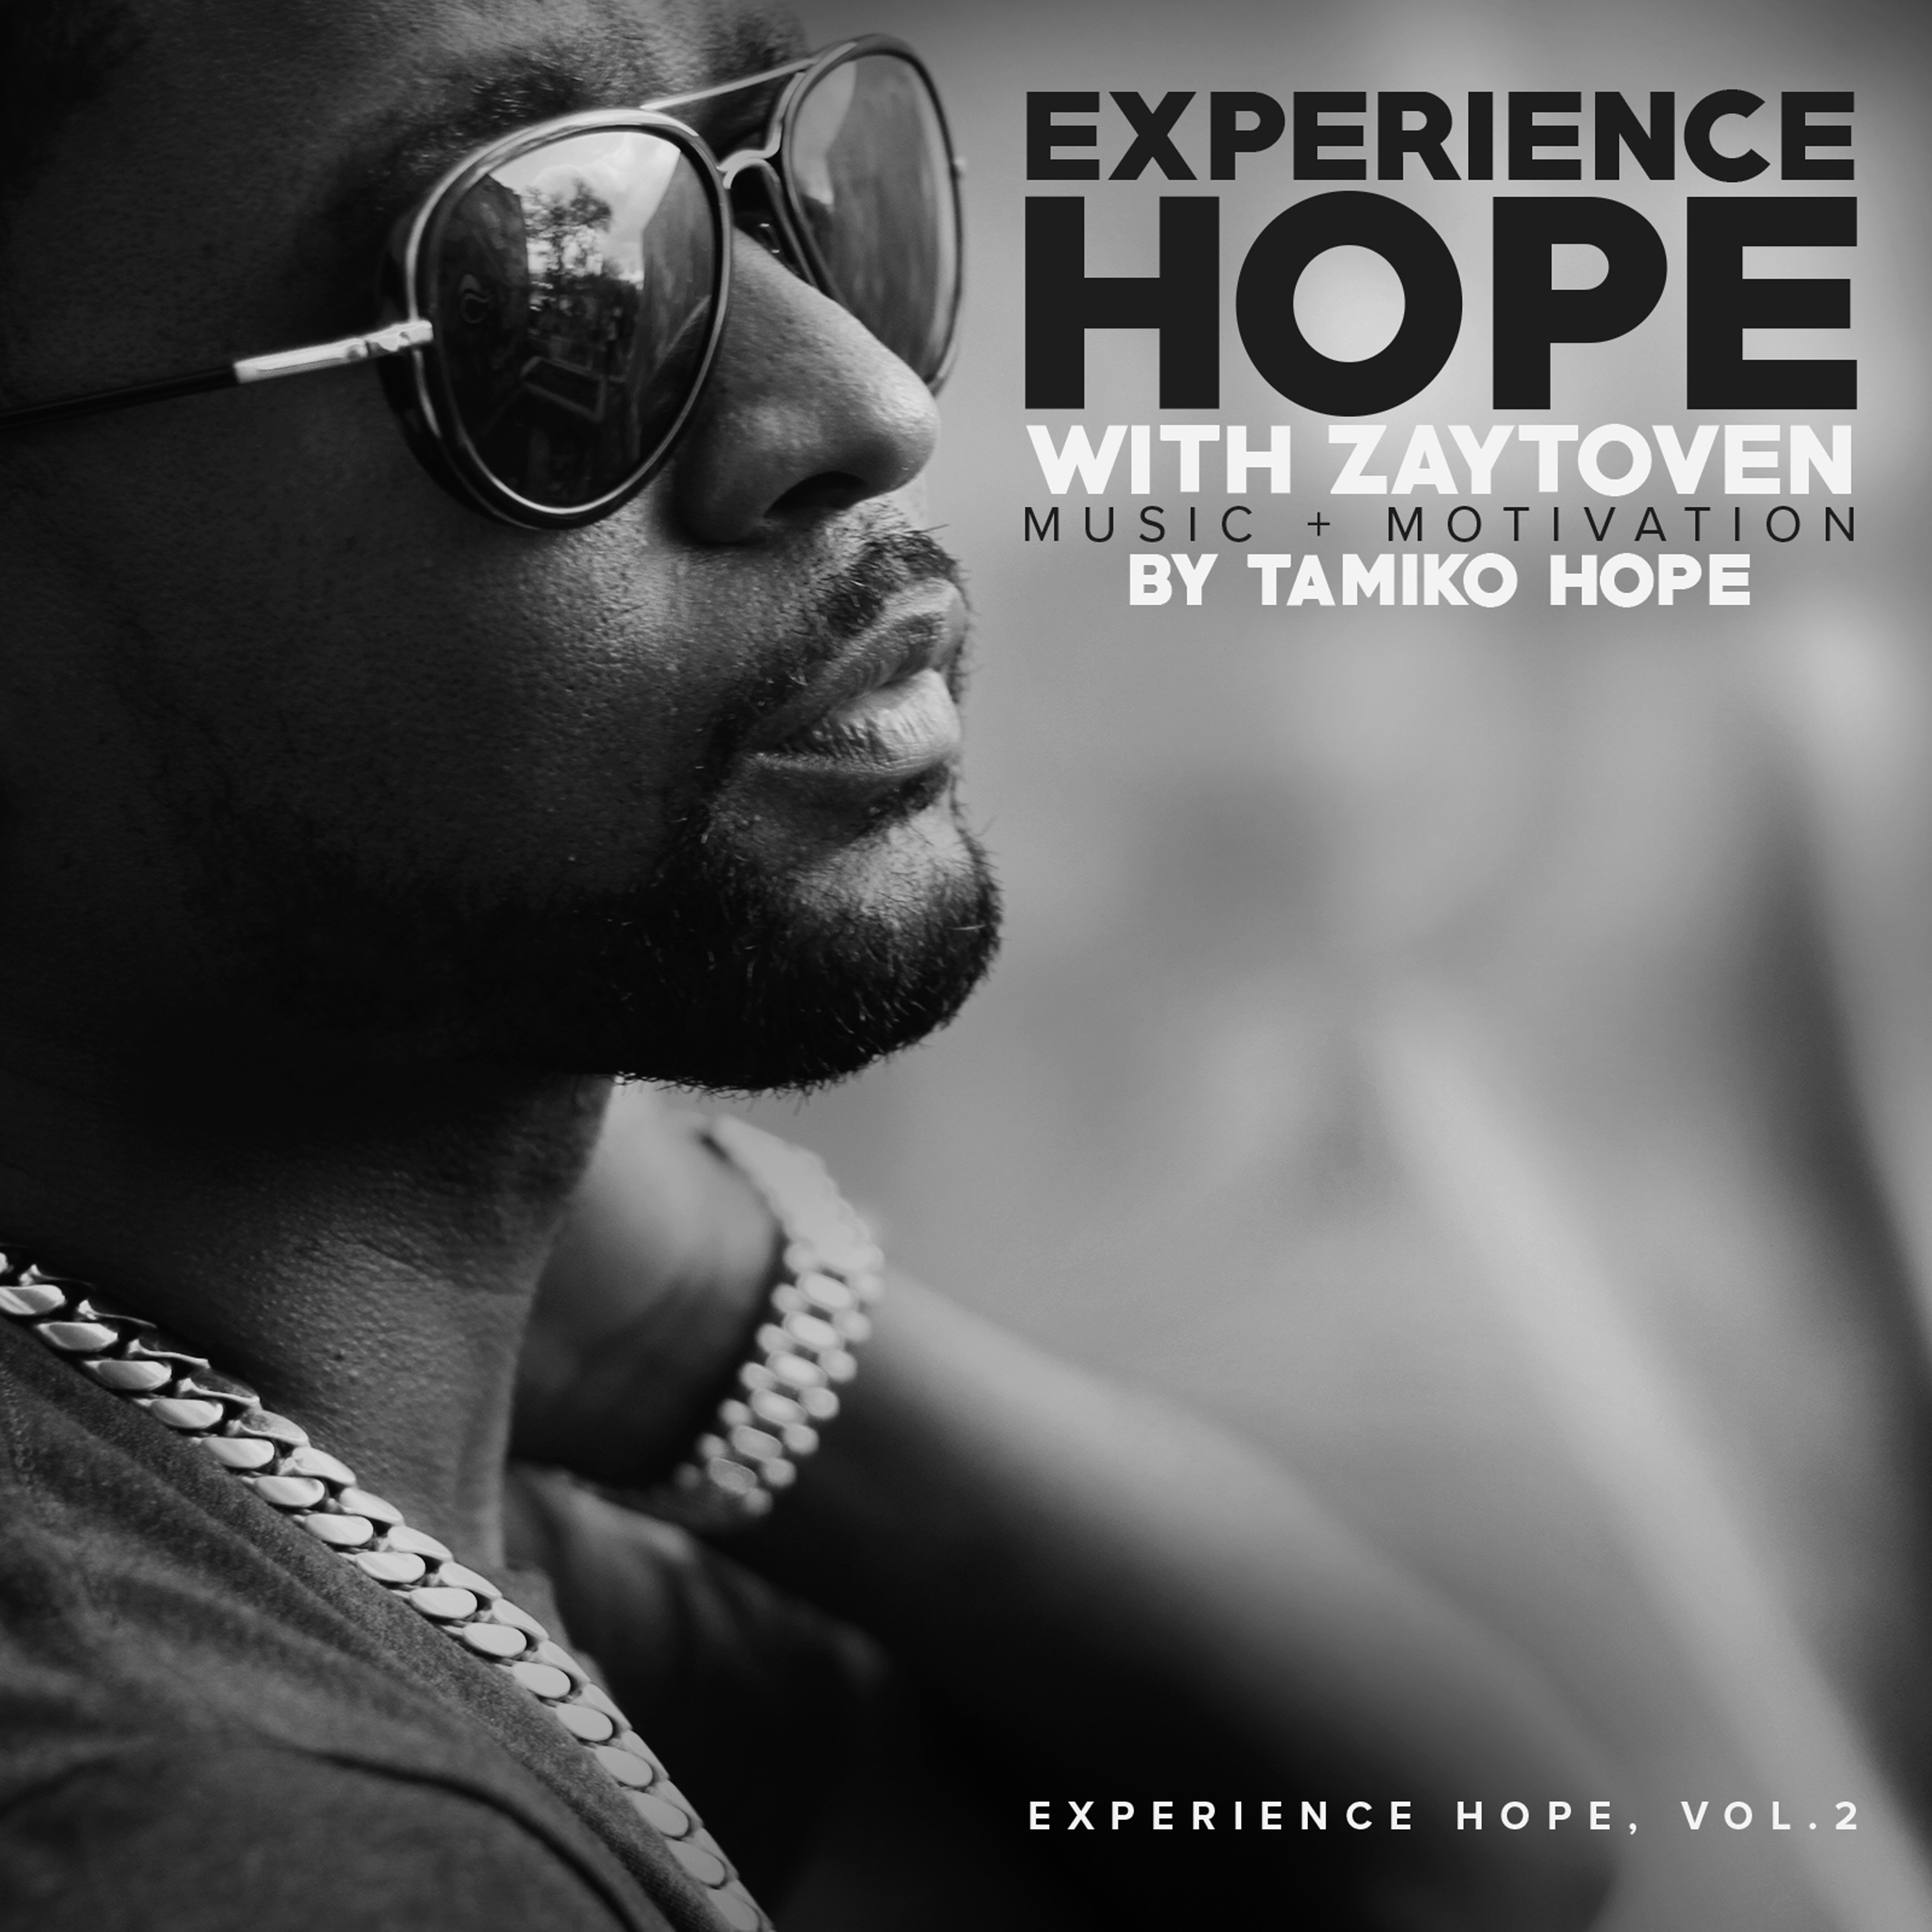 Experience Hope with Zaytoven, Vol. 2